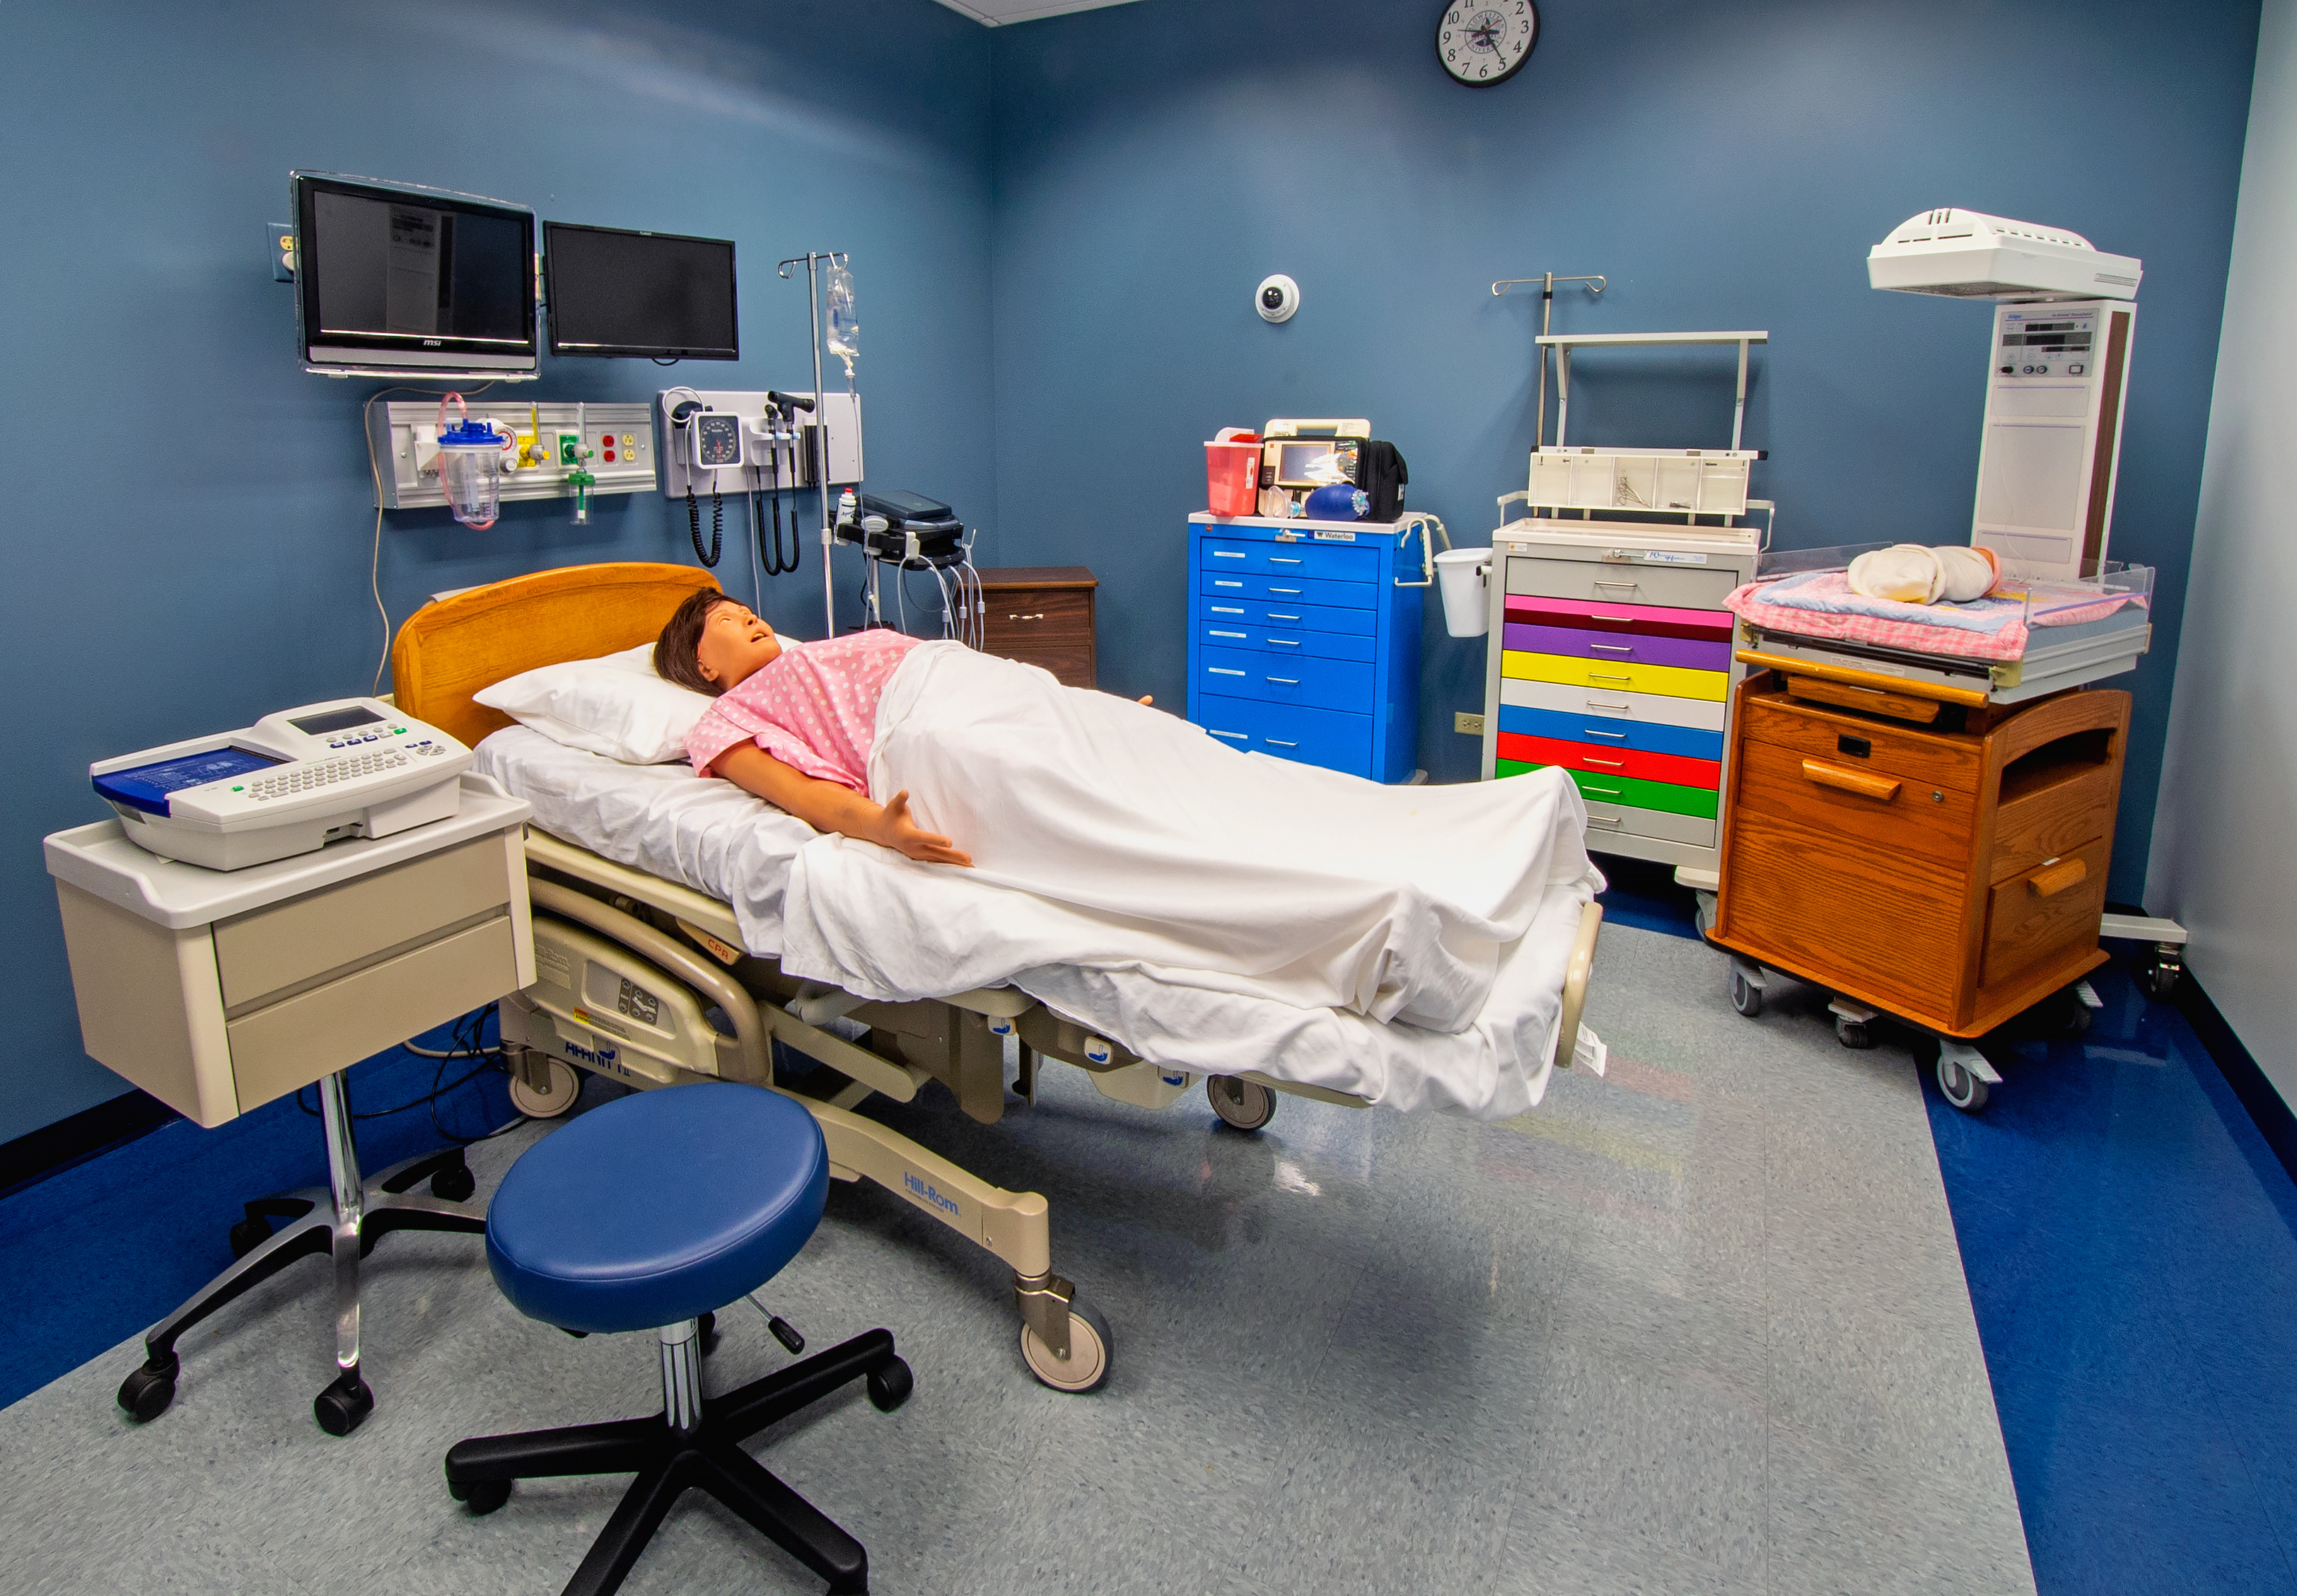 Downers Grove Simulation Center